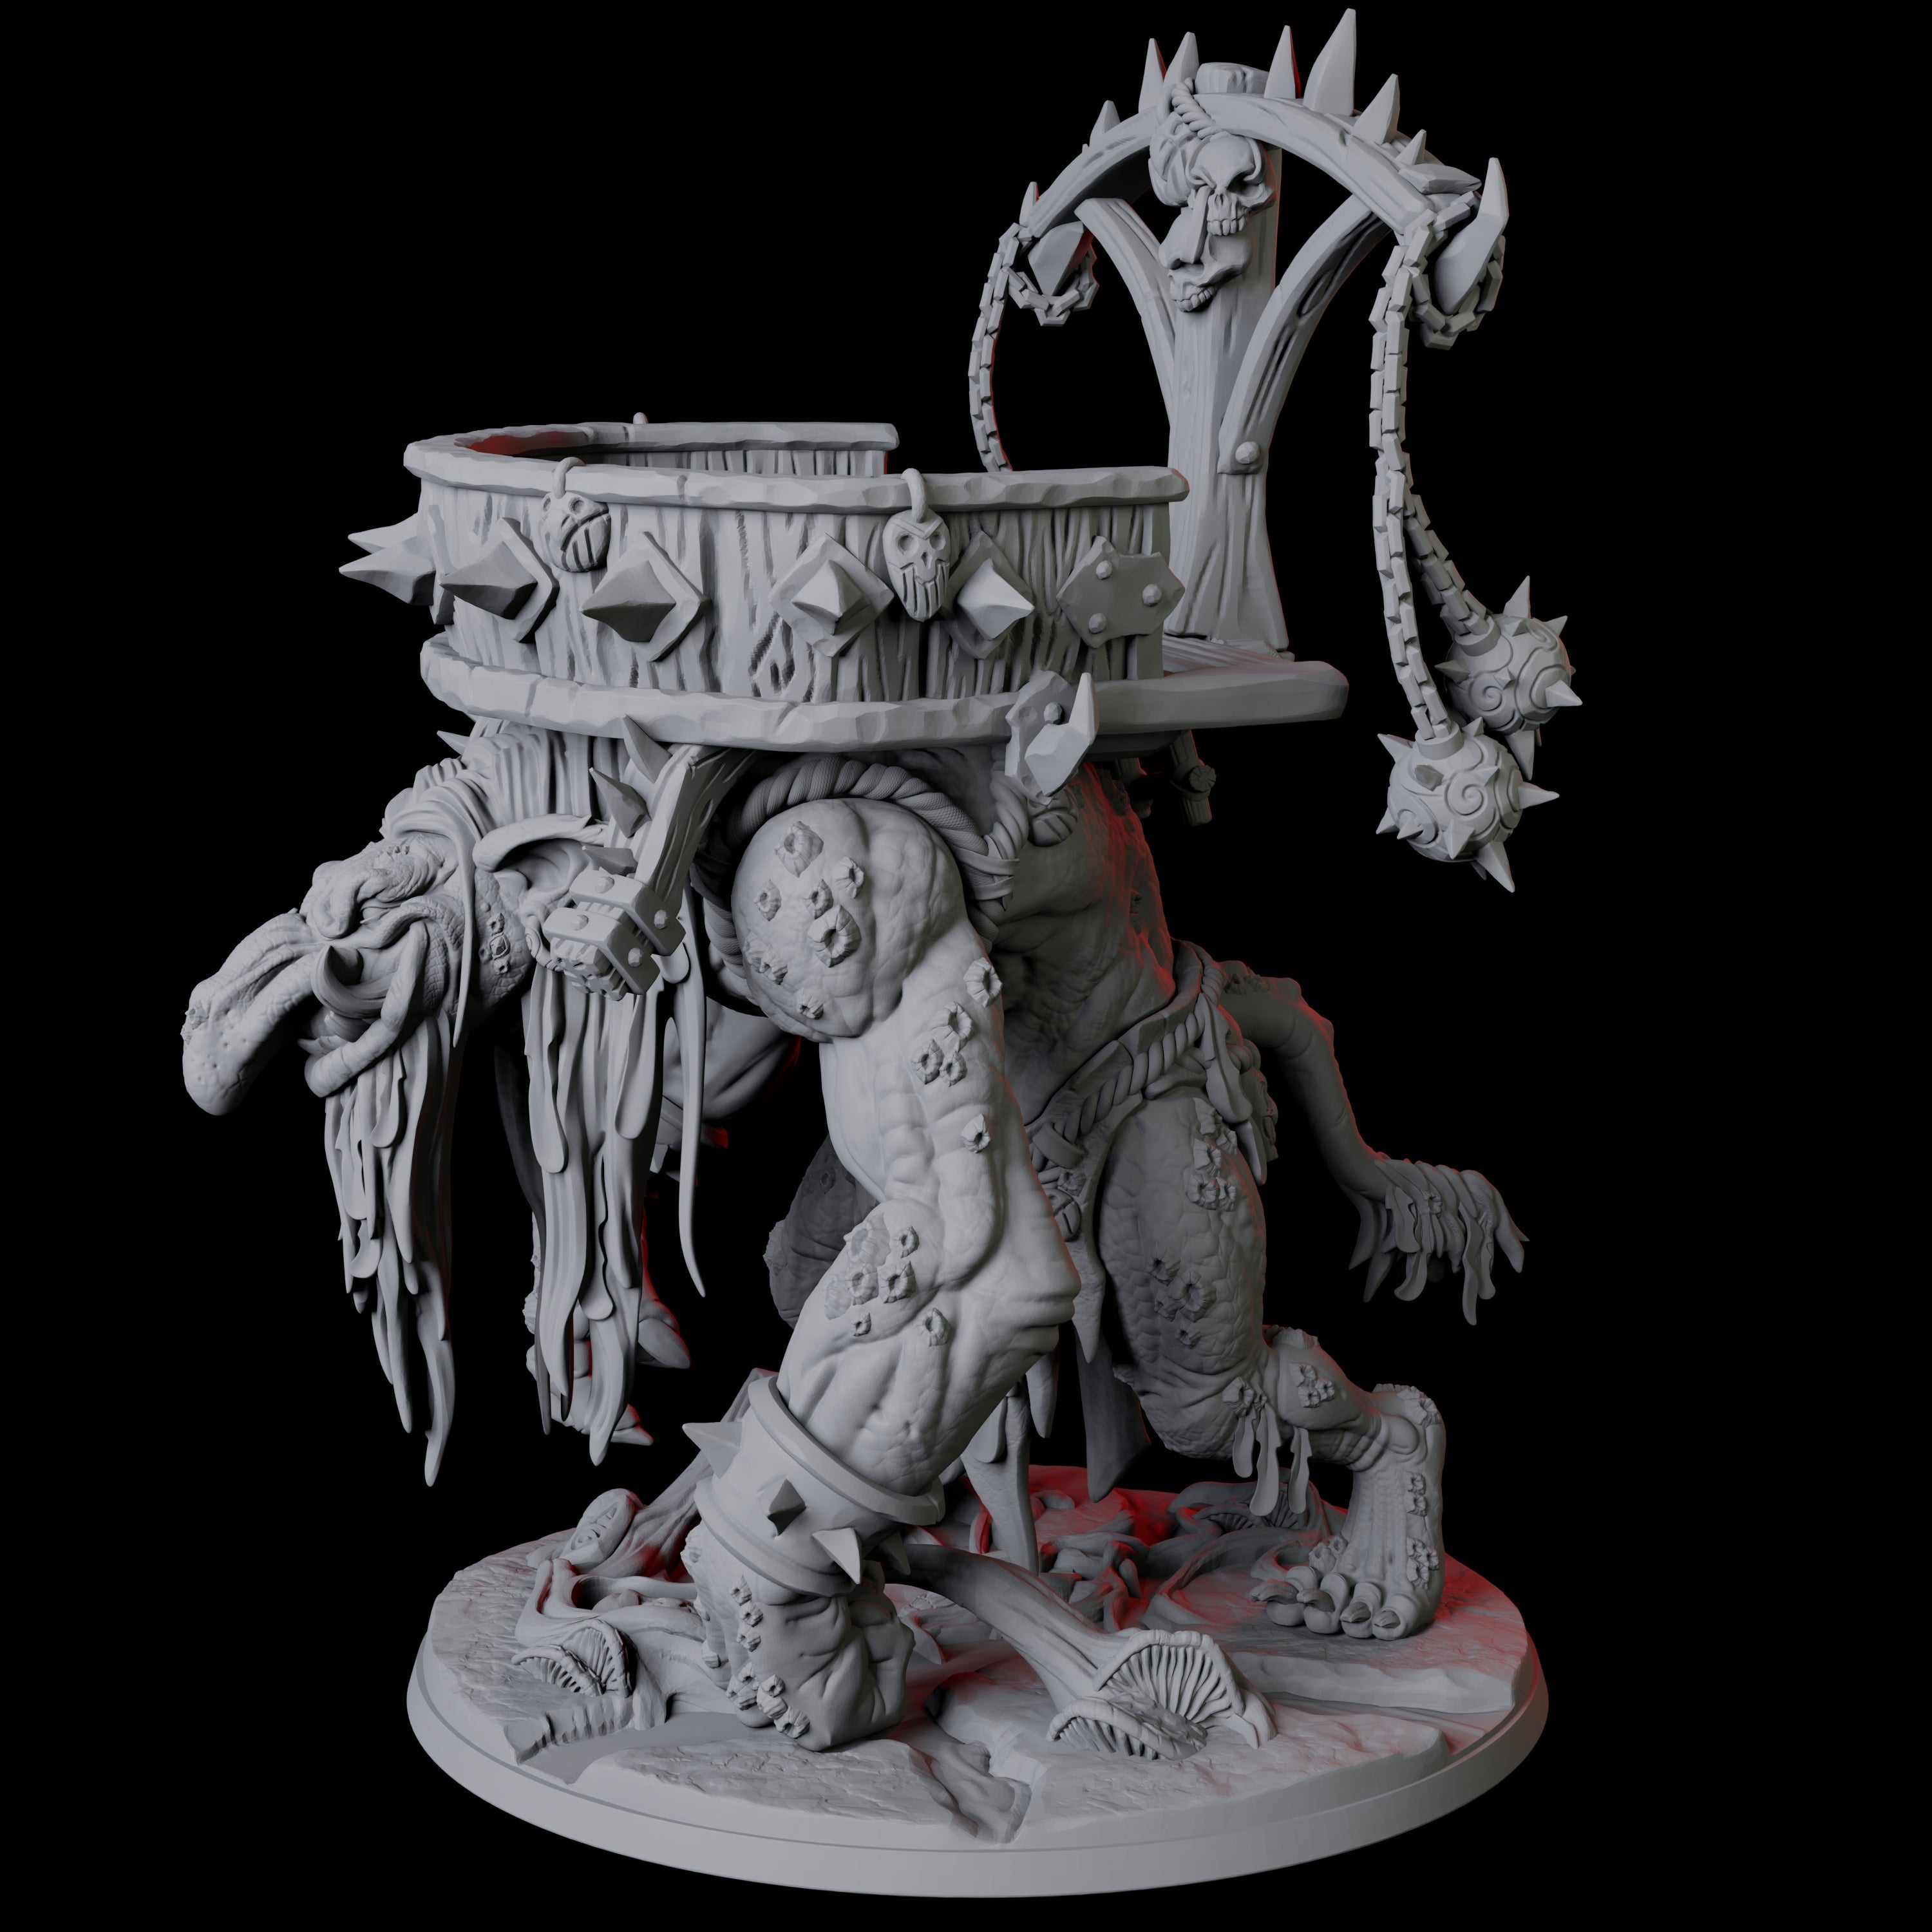 Swamp Troll Miniature for Dungeons and Dragons, Pathfinder or other TTRPGs